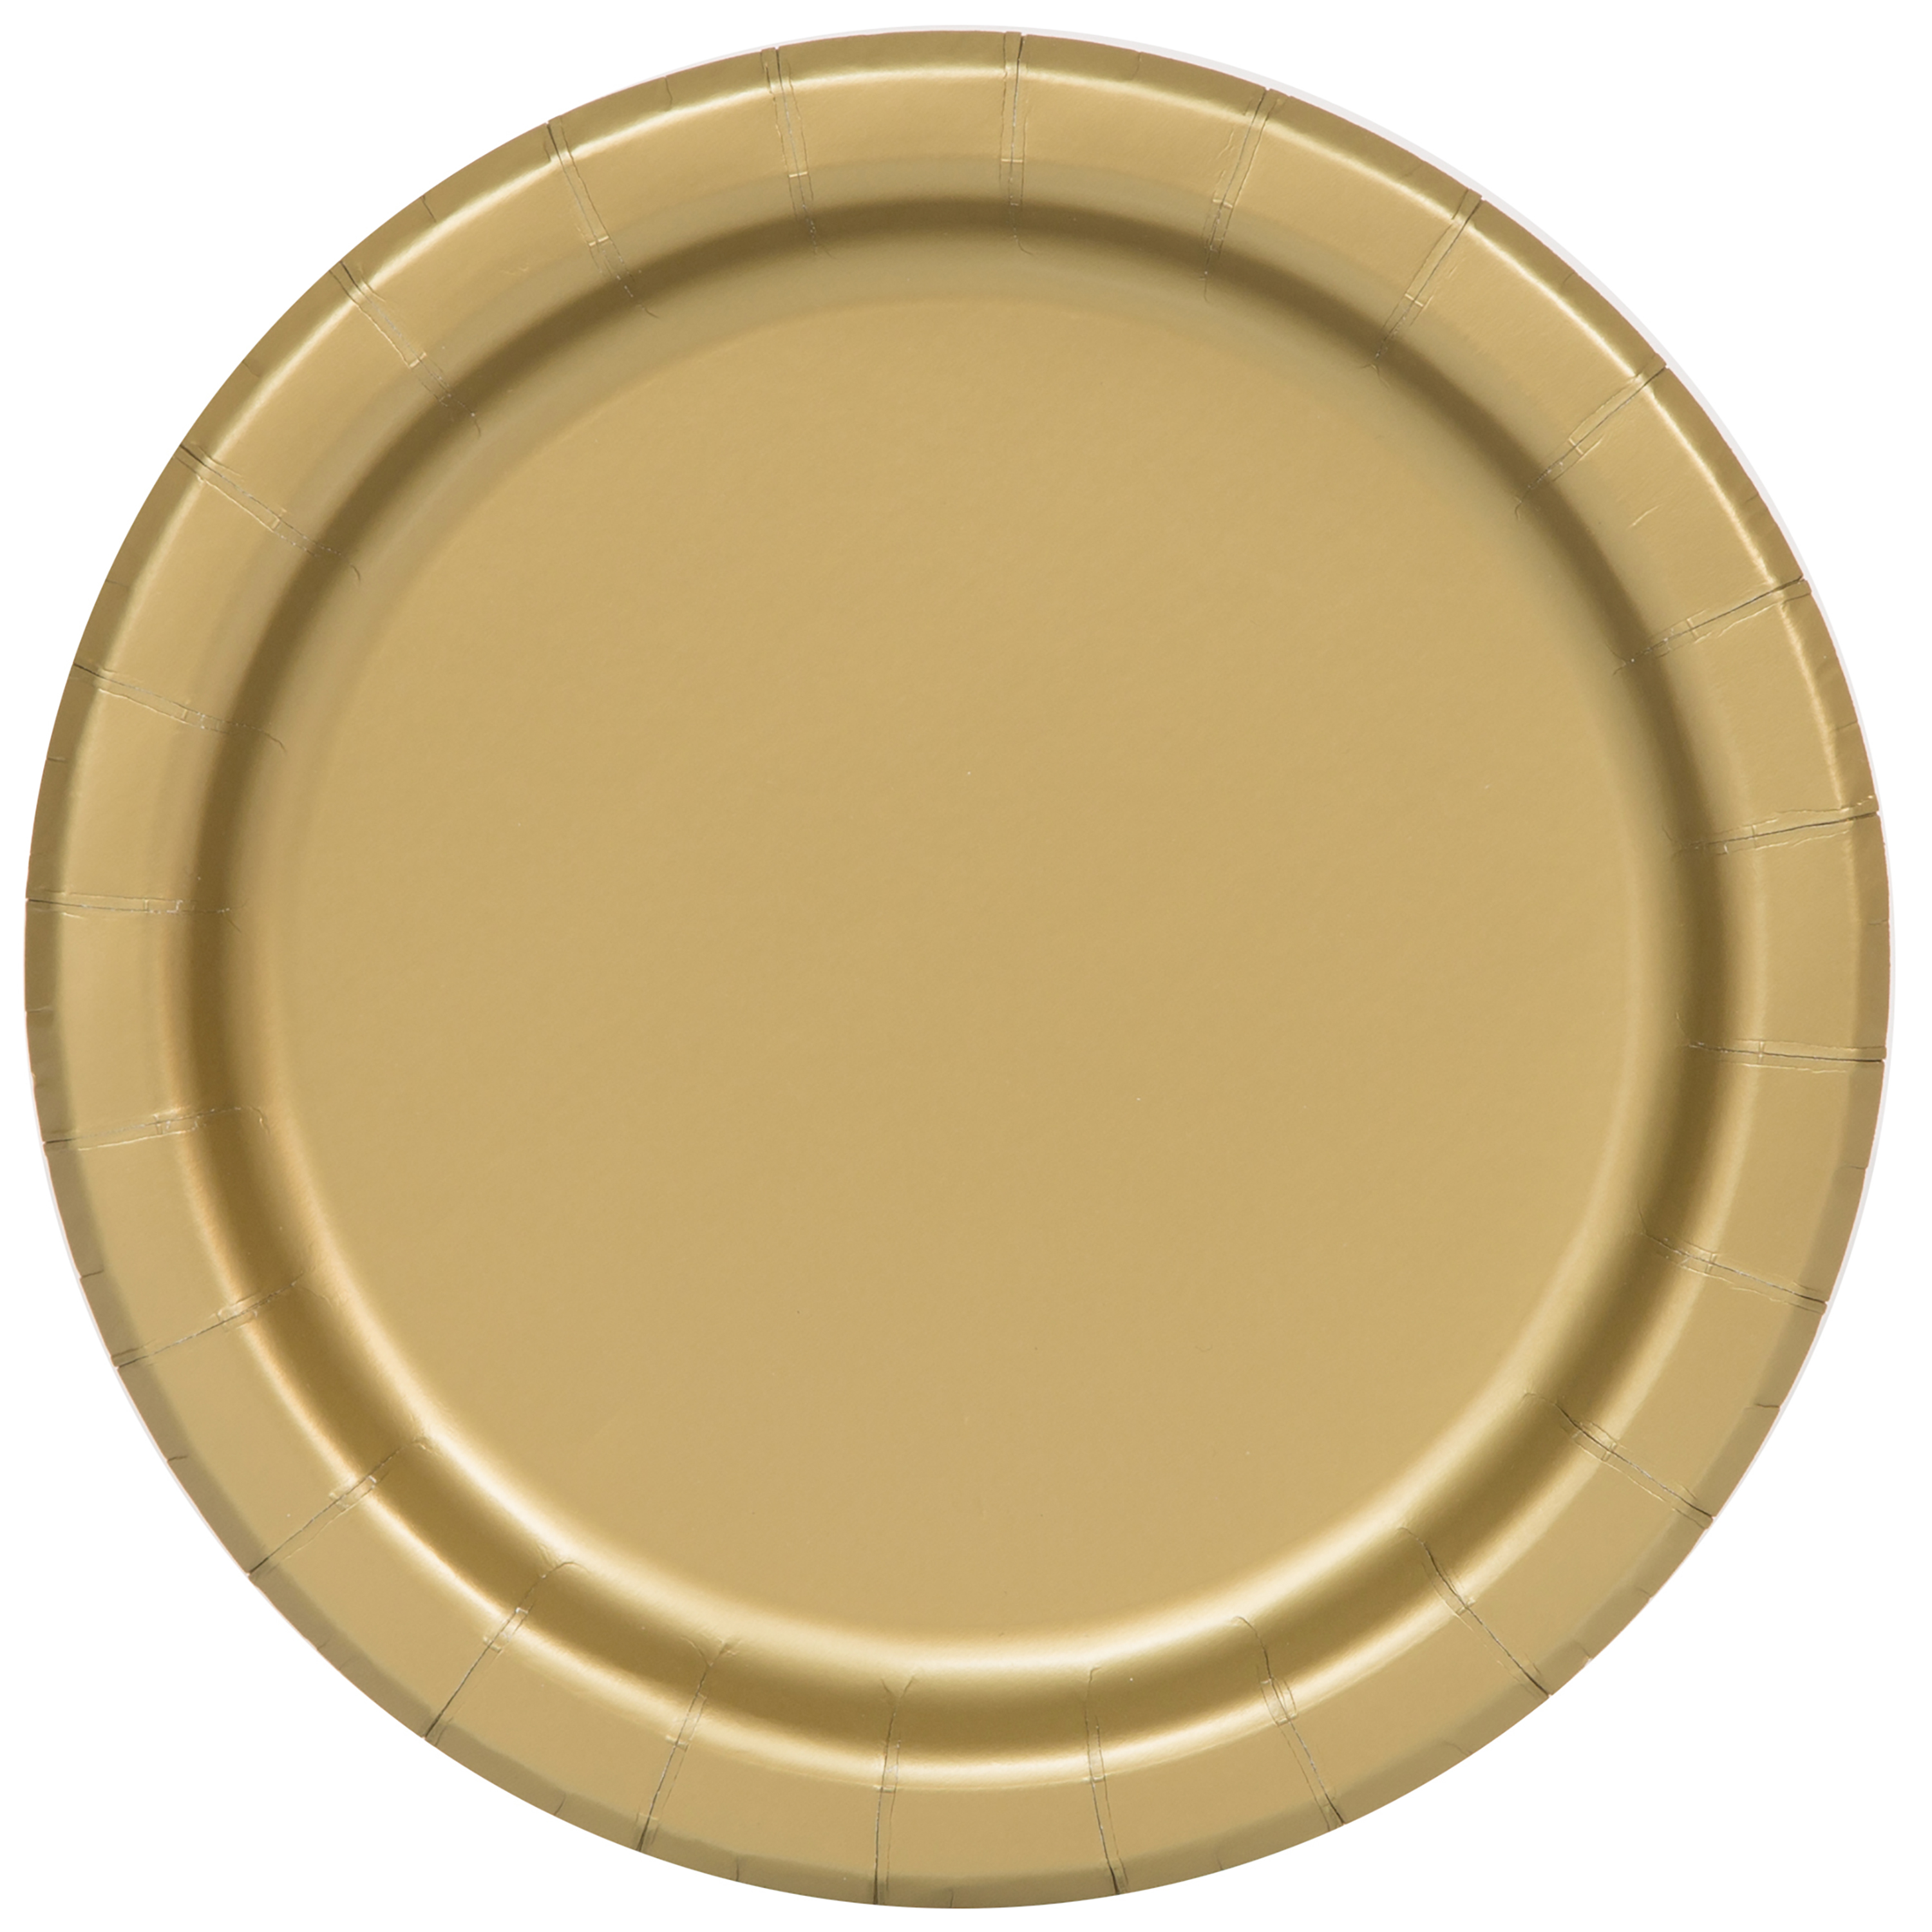 Way to Celebrate! Gold Paper Dinner Plates, 9in, 55ct - image 1 of 6